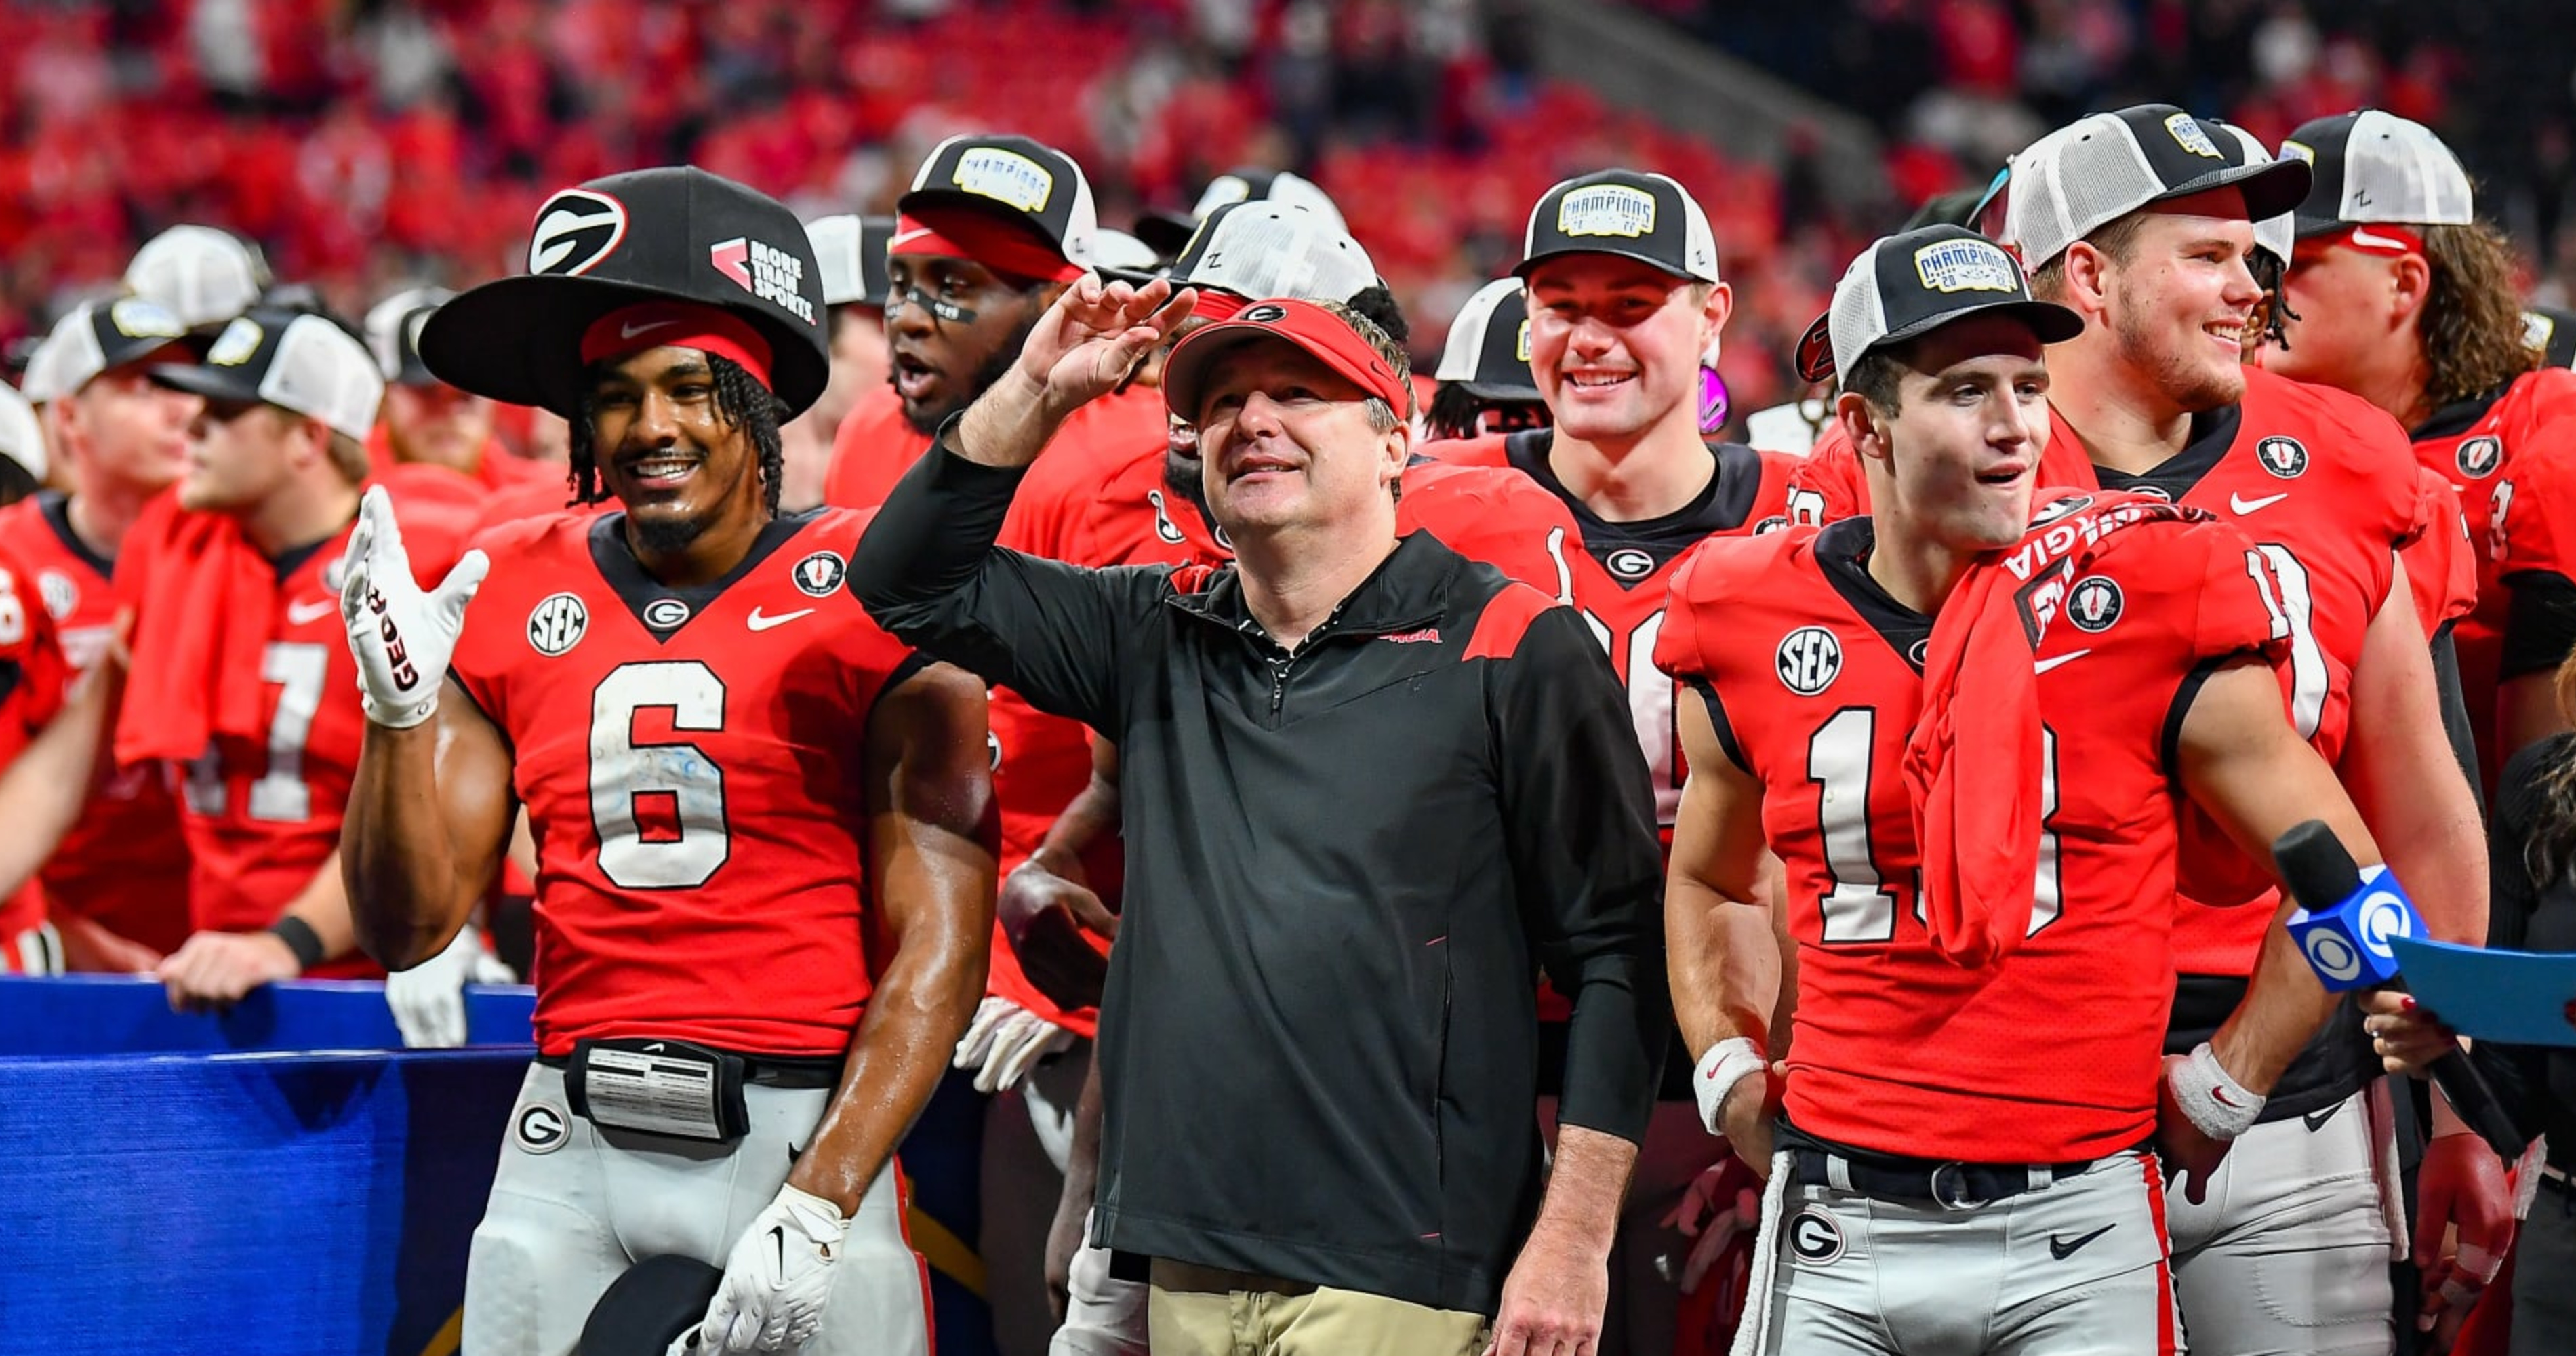 College Football Preseason Top 25 Rankings Post-2022 Early Signing Period